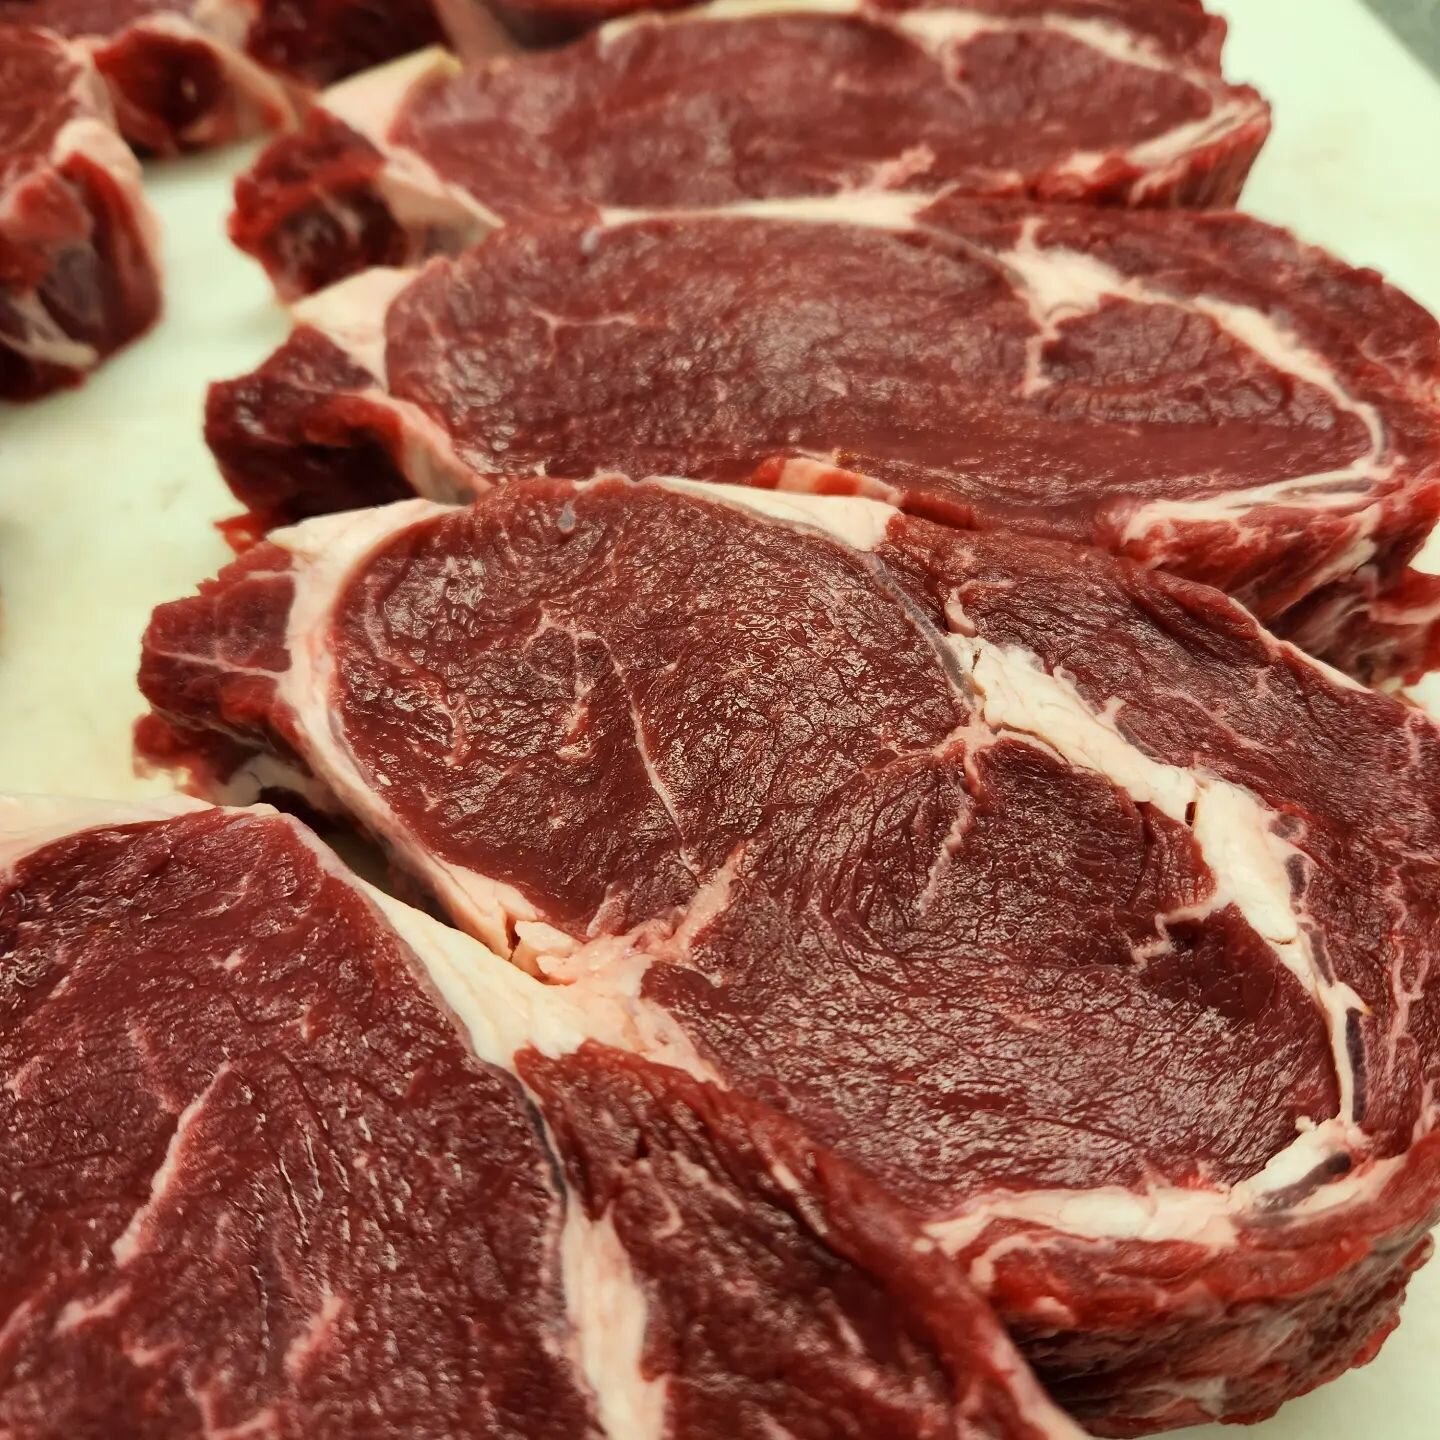 We have been waiting, and now they are ready! We have been dry aging these ribeyes for 40 days now! Very limited amount available. Will be in the counter this Thursday!

#dryagedbeef #yyc #yyceats #calgaryeats #regenerativefarming #grassfinishedbeef 